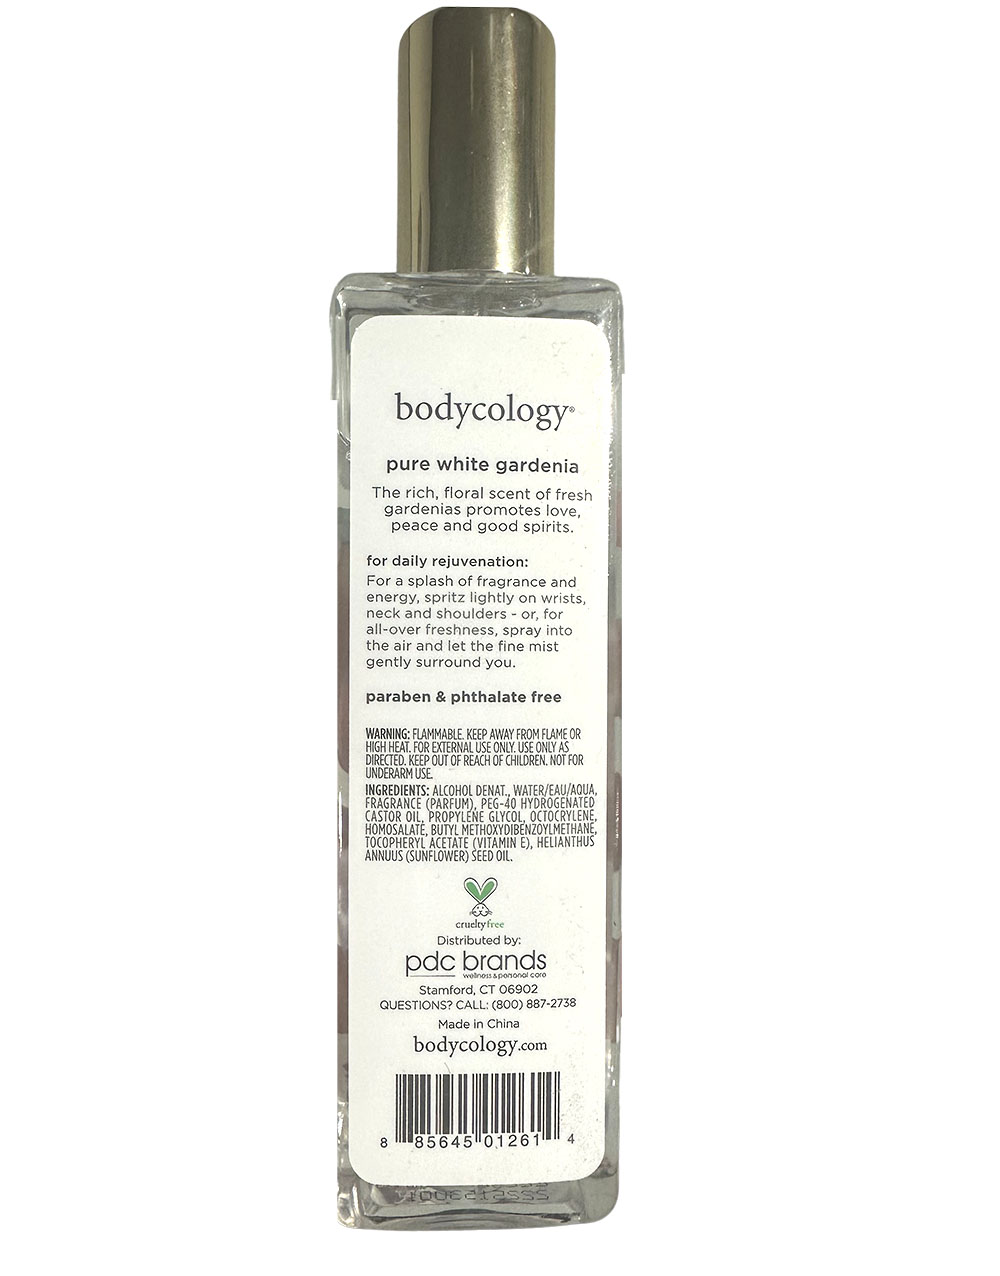 Bodycology Pure White Gardenia by Bodycology Fragrance Mist Spray 8 oz for Women - image 3 of 3